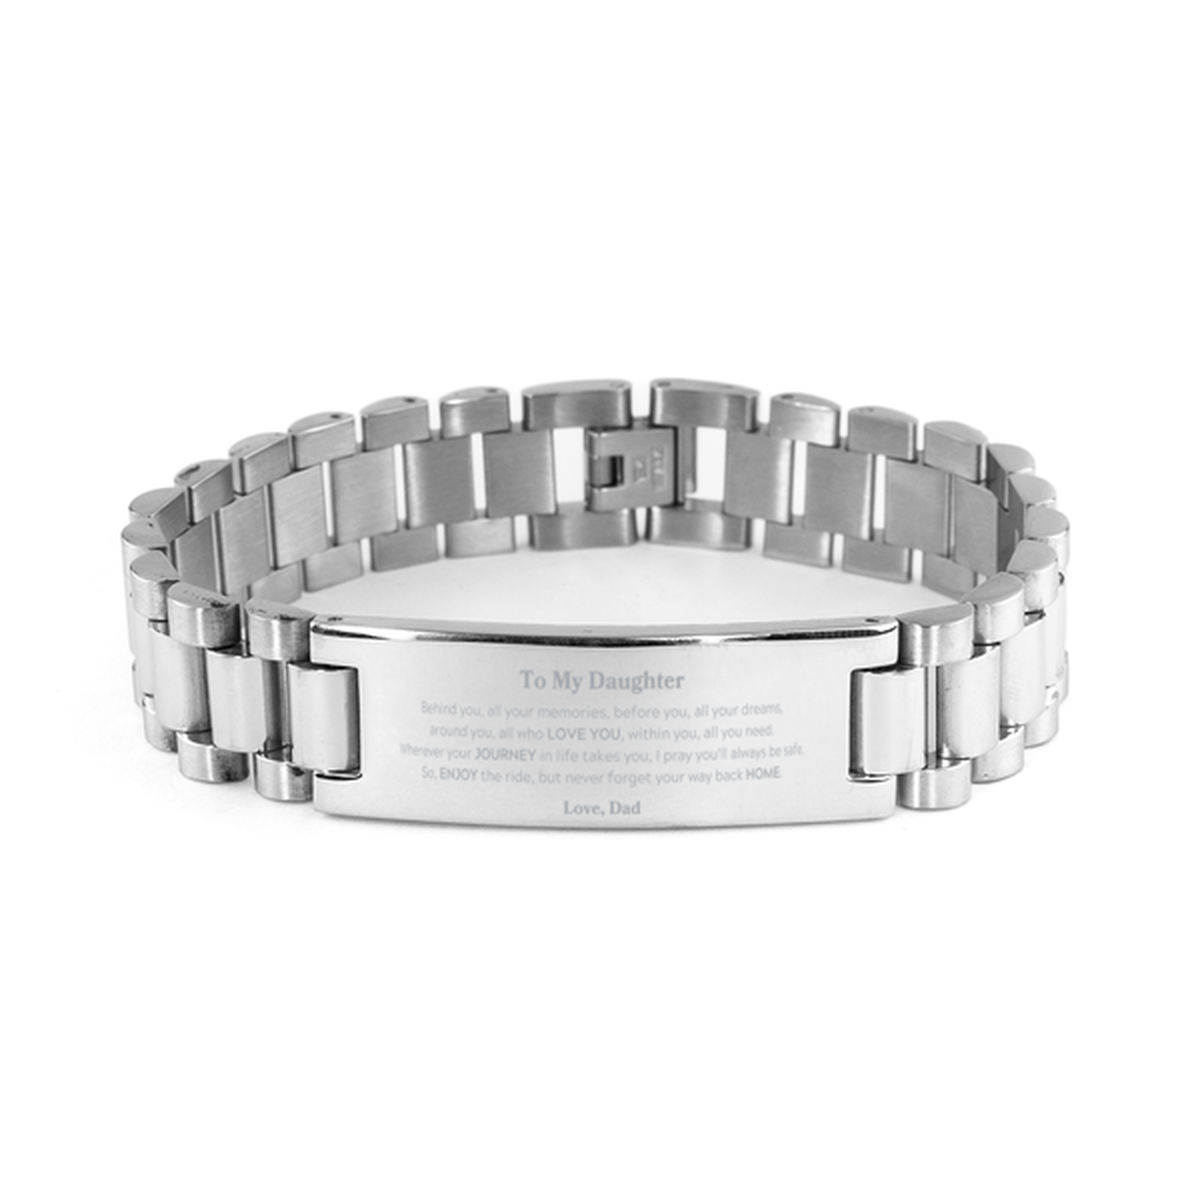 To My Daughter Graduation Gifts from Dad, Daughter Ladder Stainless Steel Bracelet Christmas Birthday Gifts for Daughter Behind you, all your memories, before you, all your dreams. Love, Dad